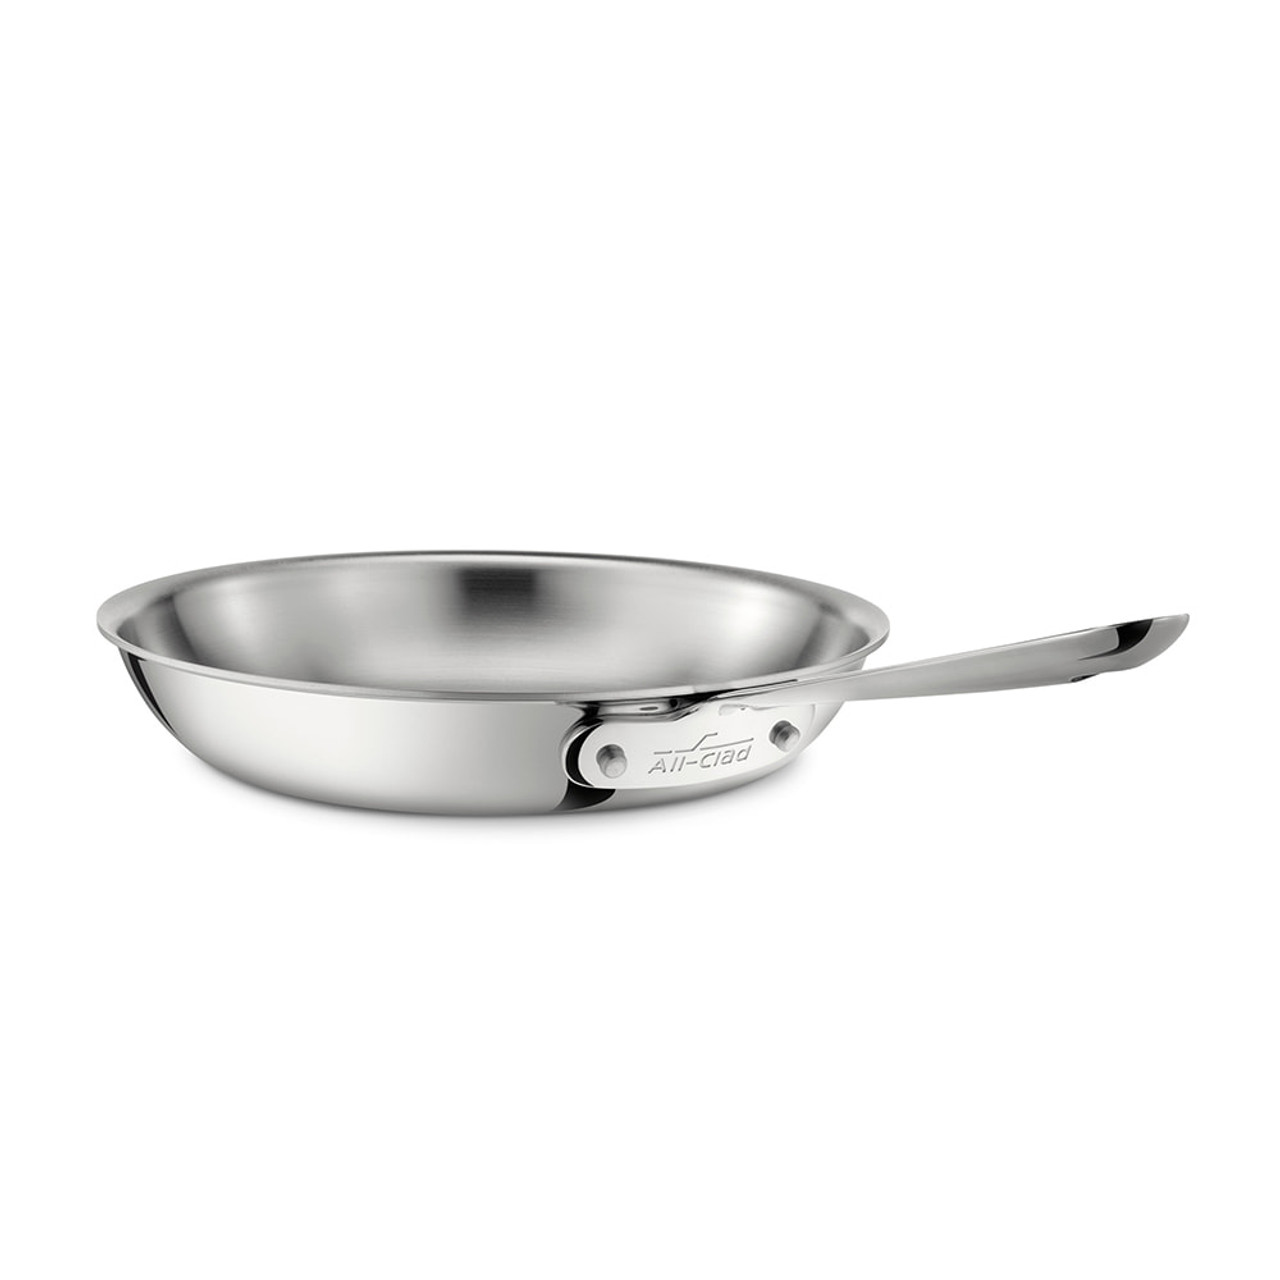 https://cdn11.bigcommerce.com/s-hccytny0od/images/stencil/1280x1280/products/484/8437/all-clad-stainless-steel-fry-pan-10-inch__61215.1598234950.jpg?c=2?imbypass=on